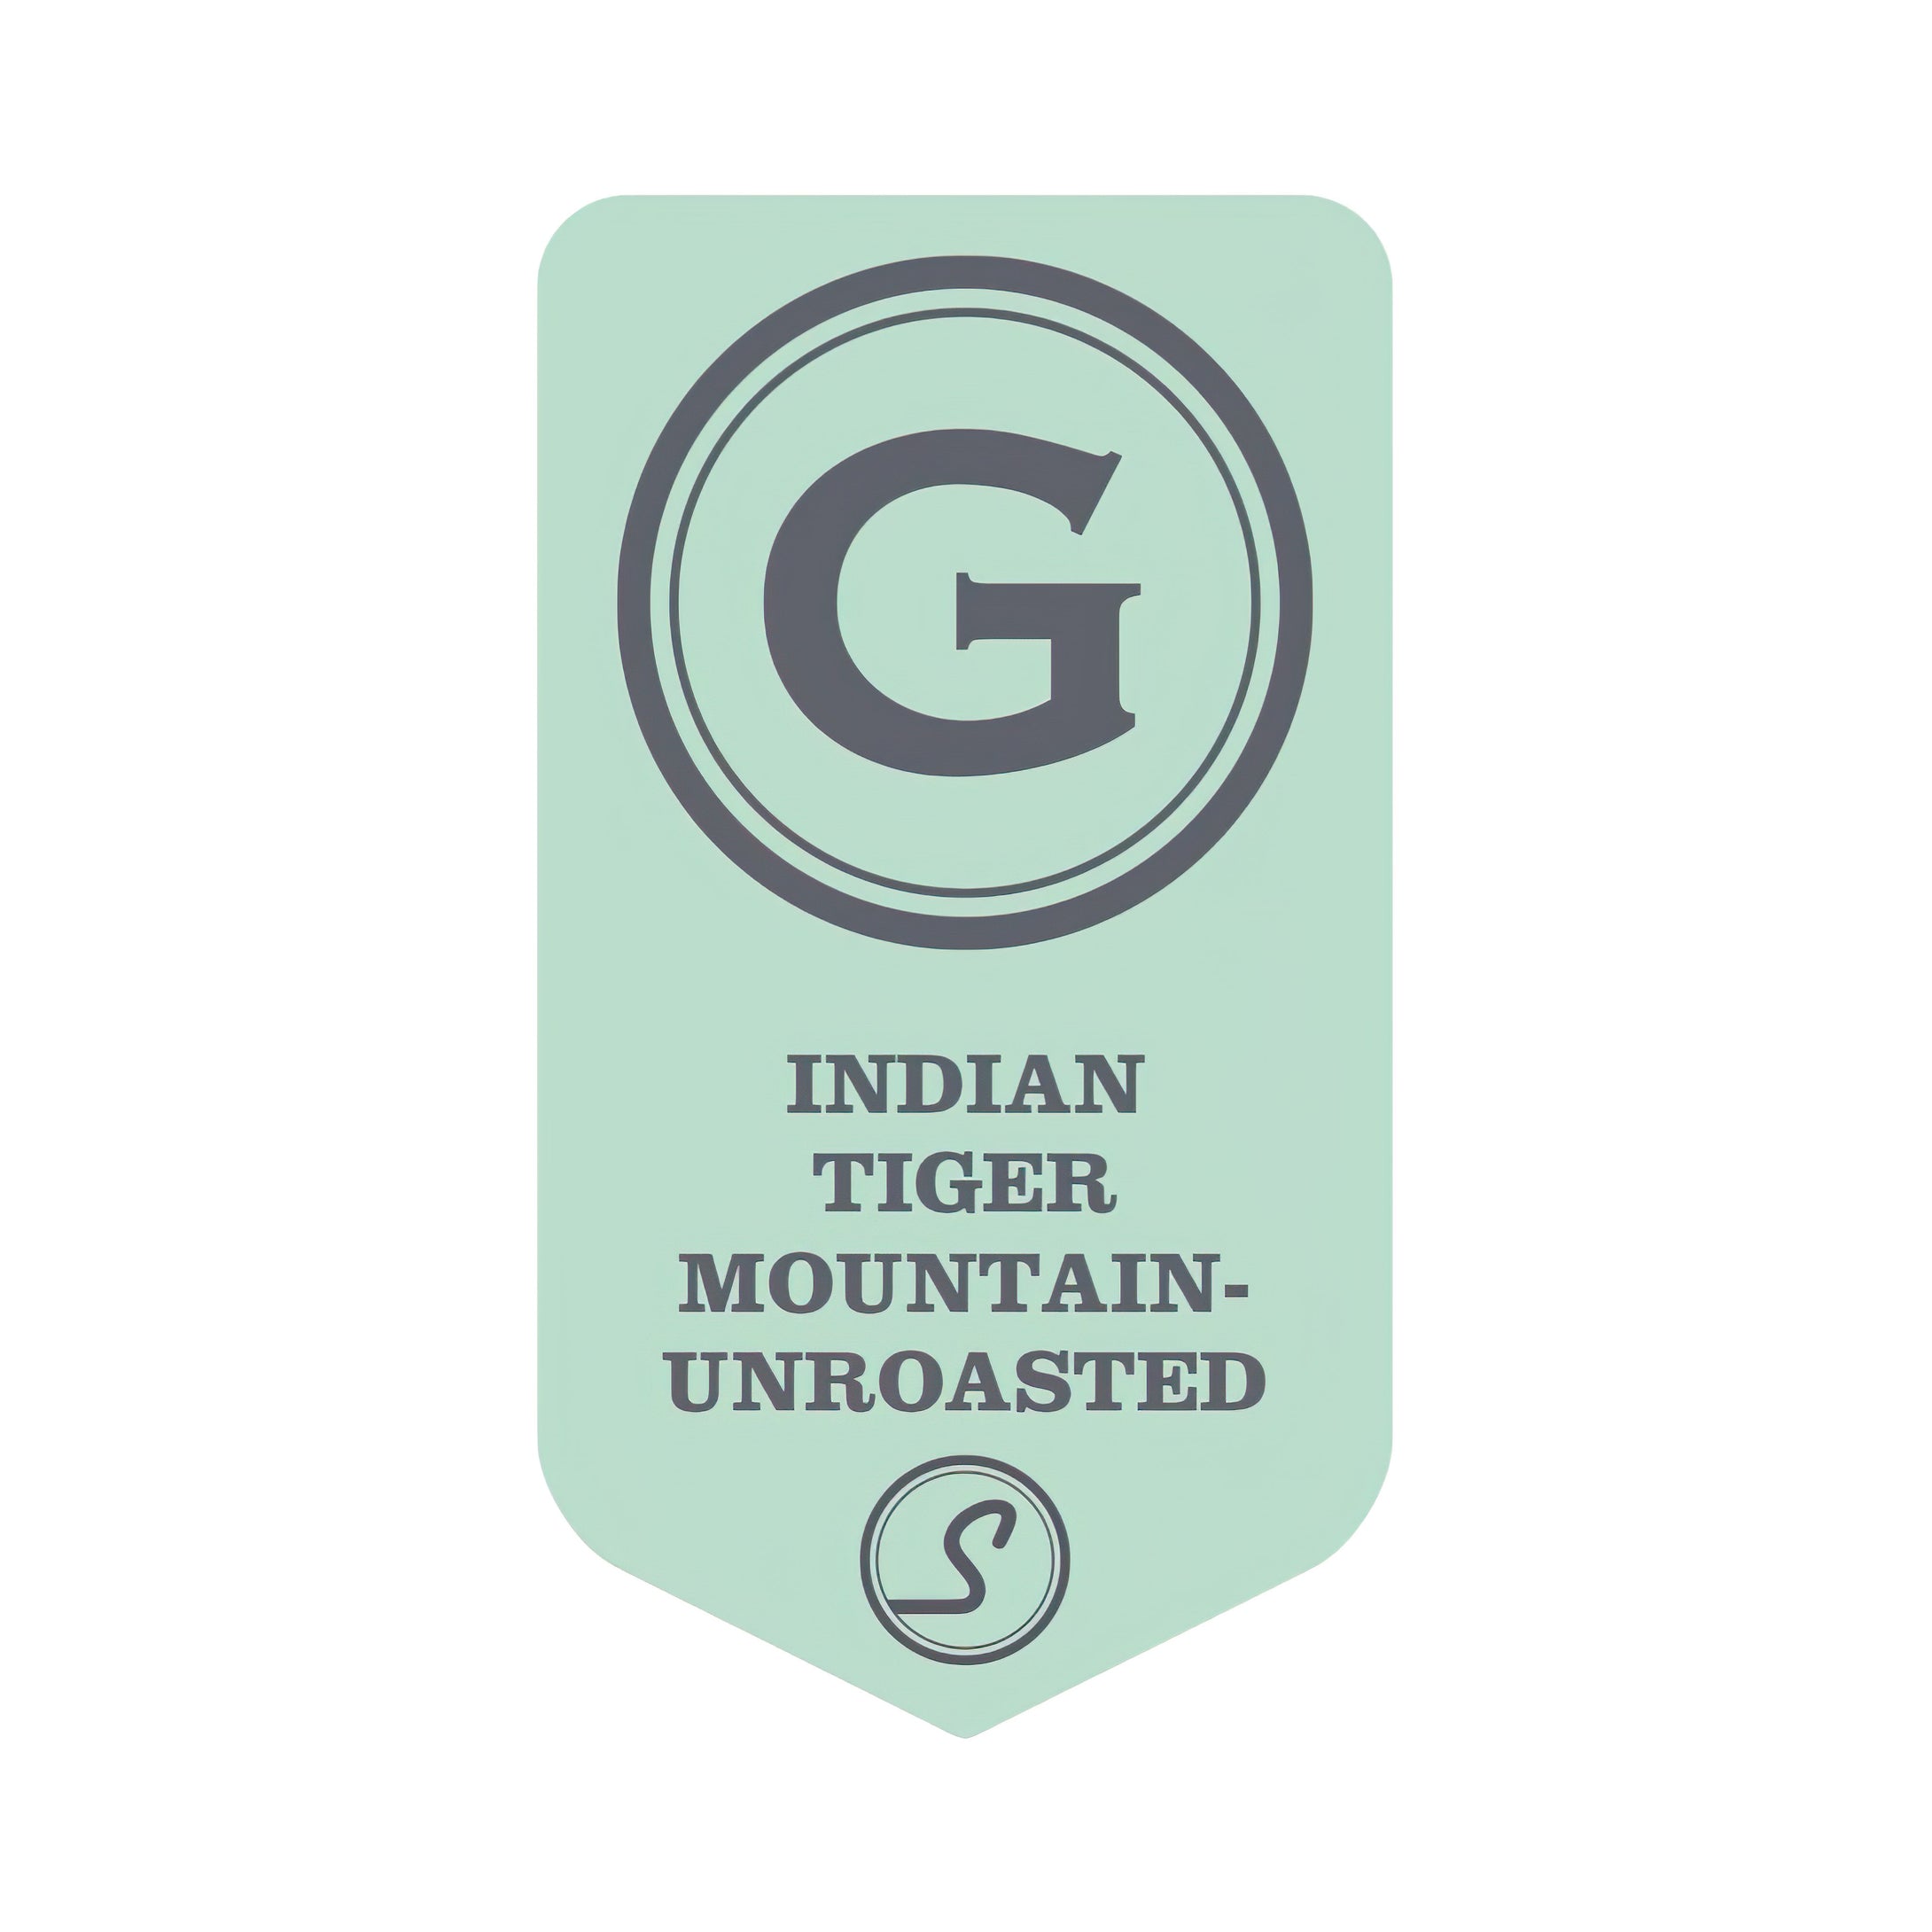 Indian Tiger Mountain - UNROASTED